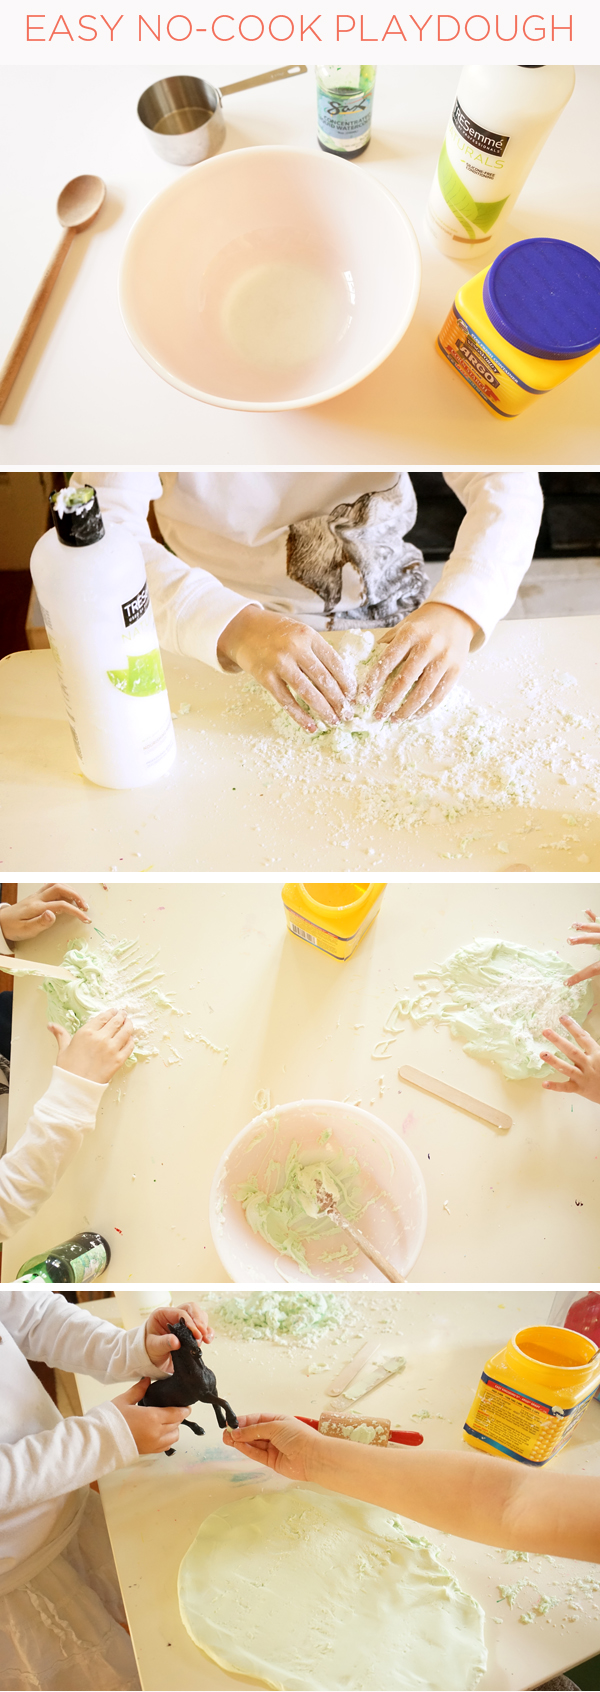 This Easy No Cook Playdough is made with hair conditioner and corn starch (aka corn flour). It comes together quickly and encourages imaginative play - awesome stuff! |TinkerLab.com